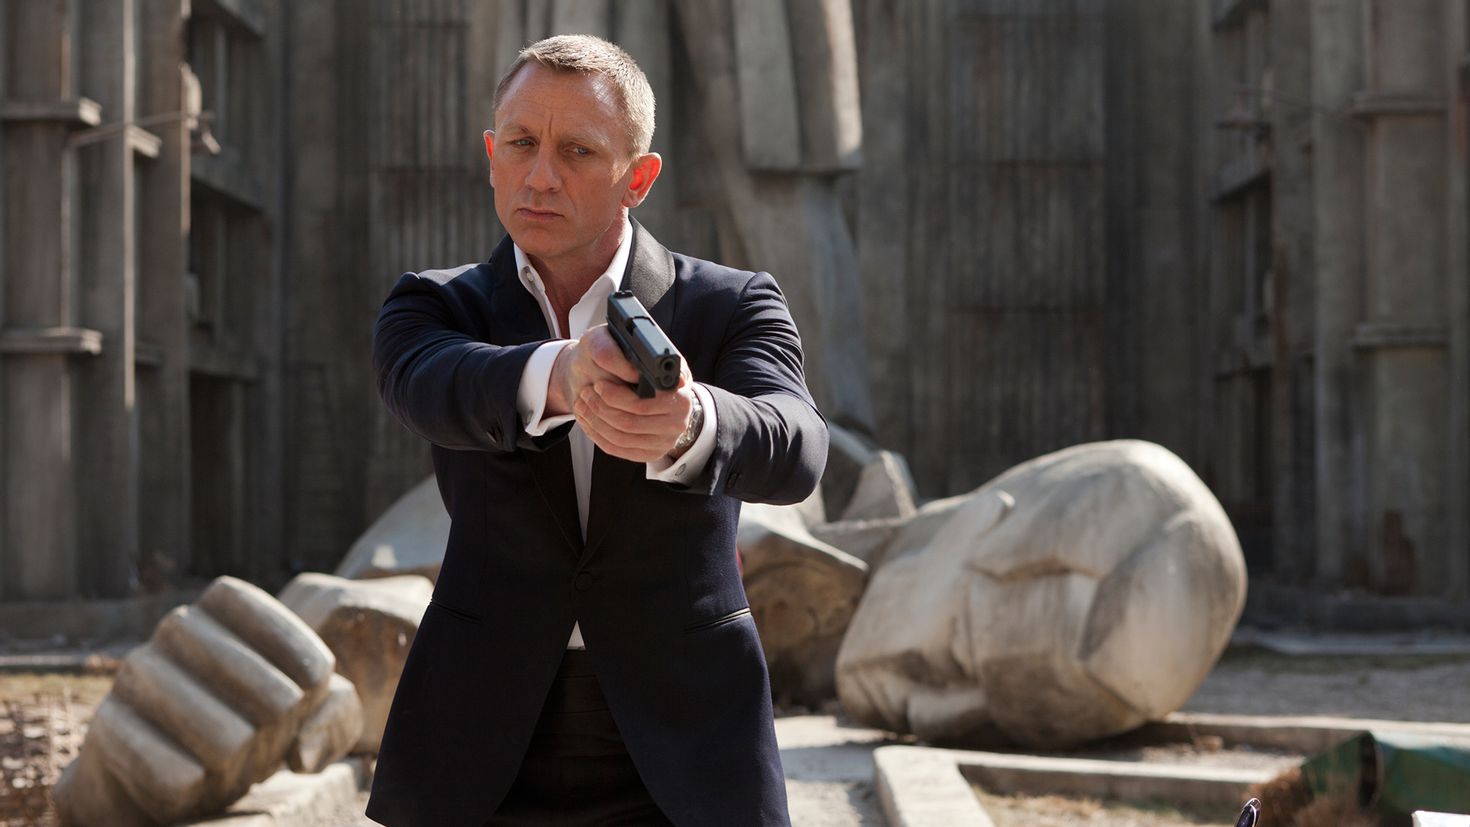 SKYFALL: a bit of a downer